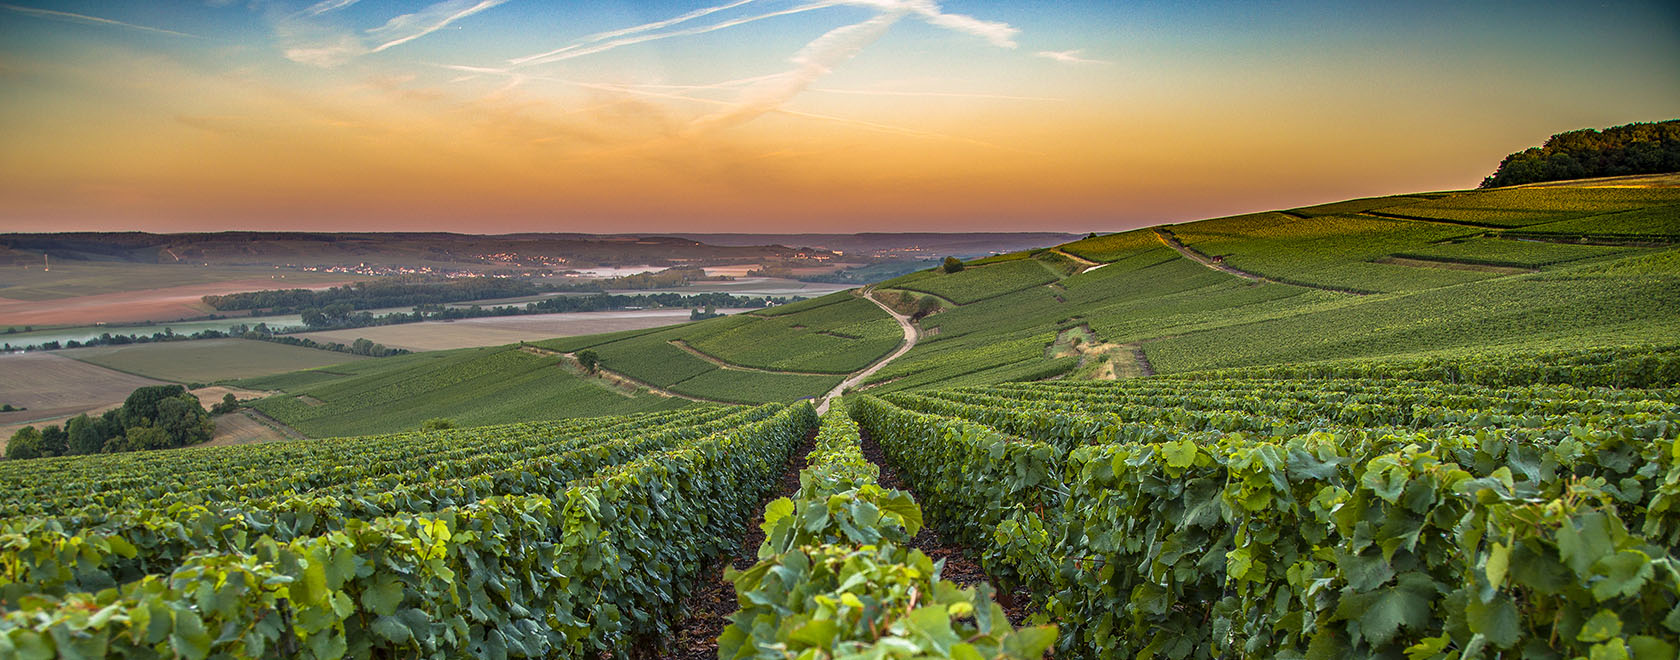 French wine country at sunset with view of vineyards stretching to the horizon.